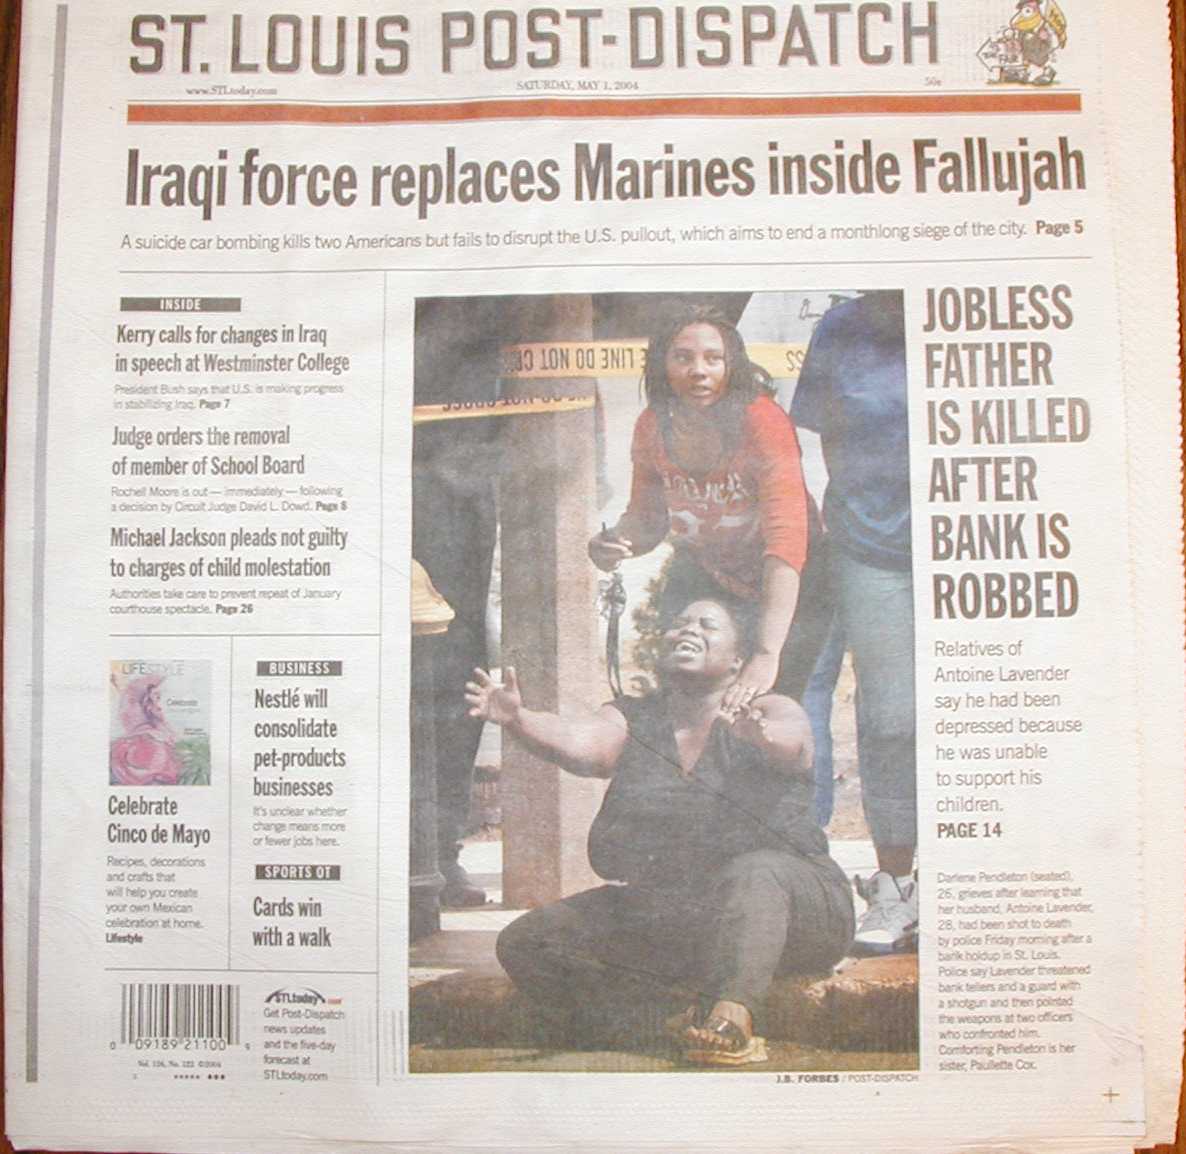 Post-Dispatch early edition